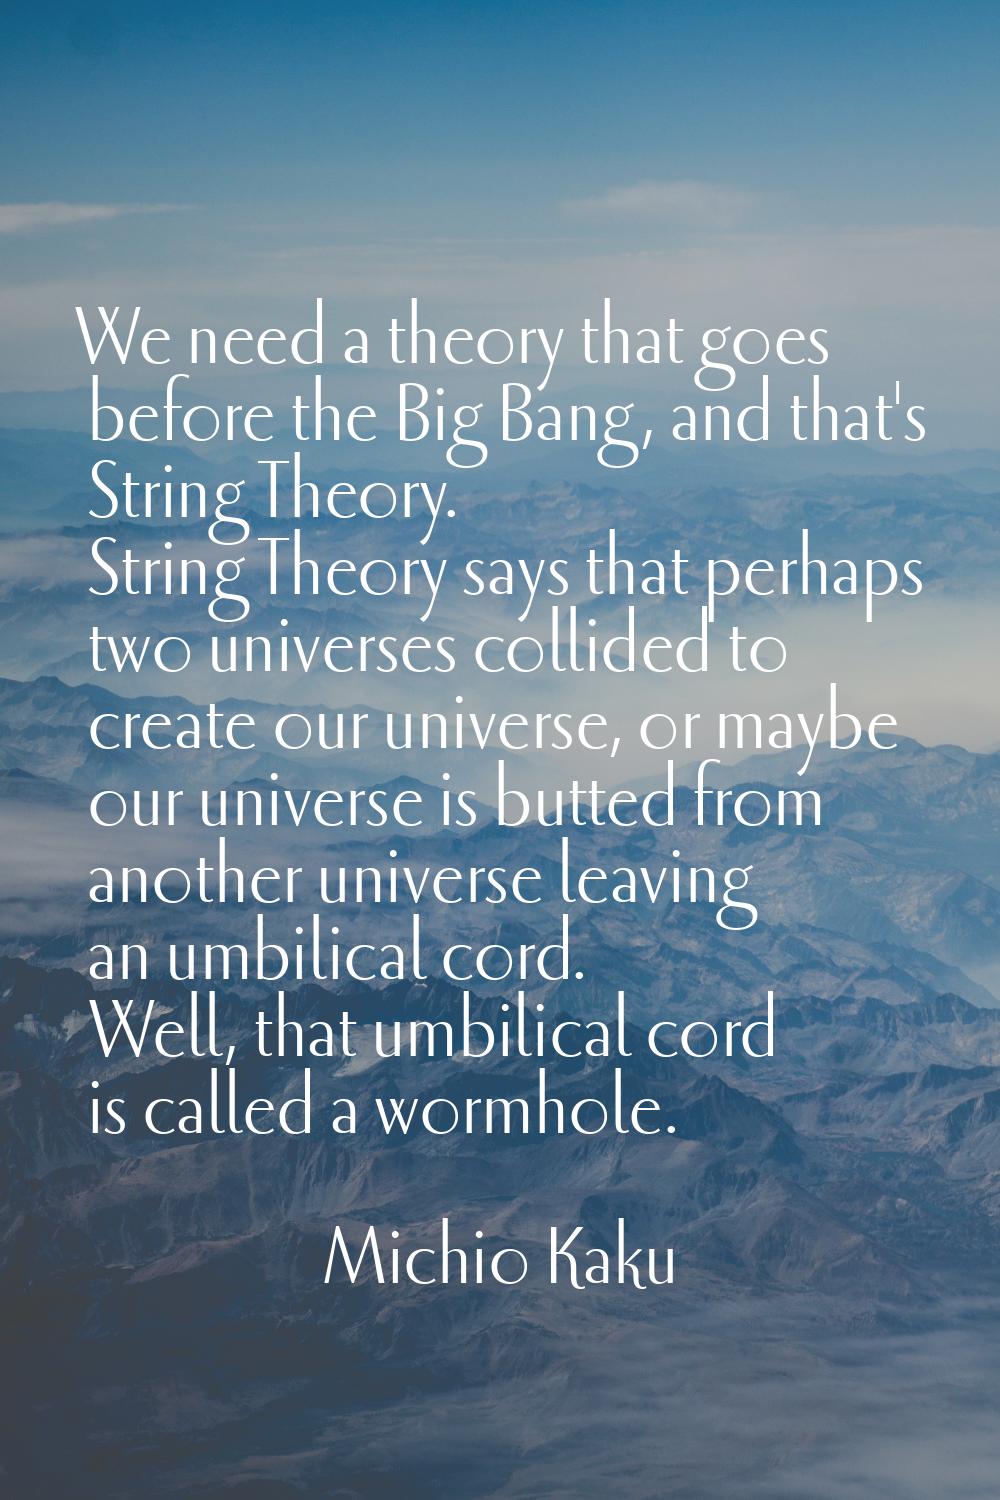 We need a theory that goes before the Big Bang, and that's String Theory. String Theory says that p